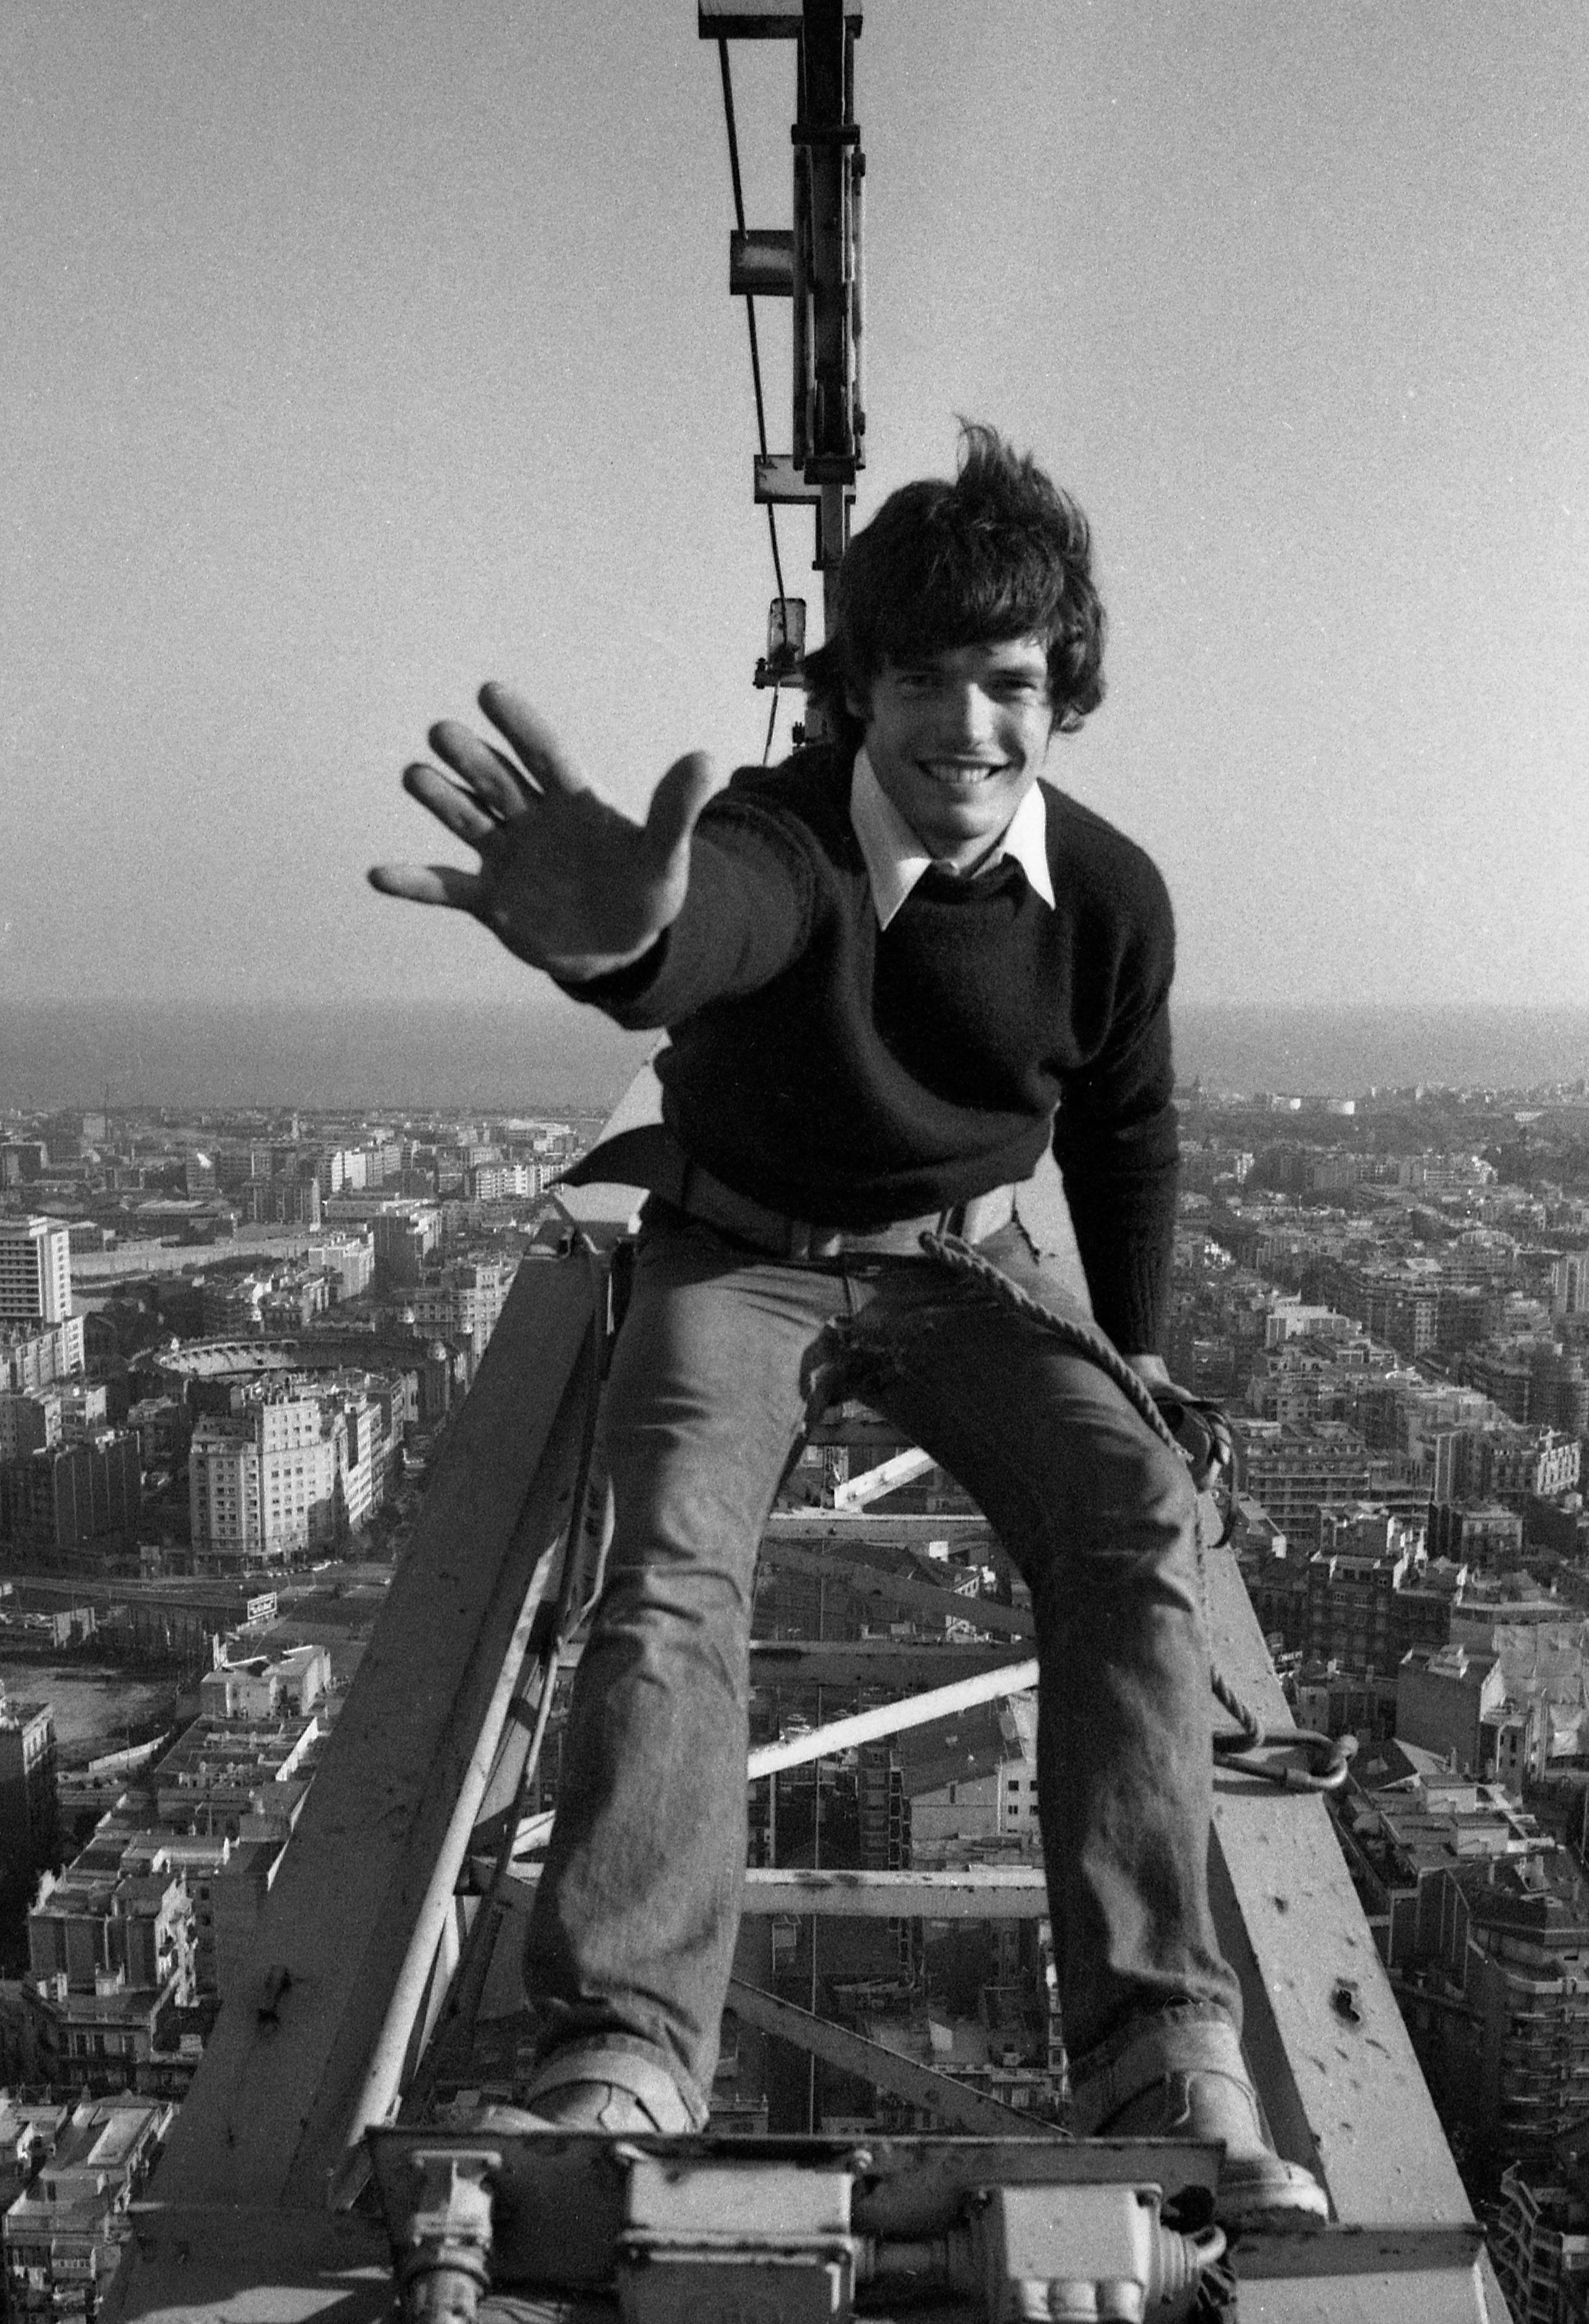 A black and white image of a young man standing on top of a crane reaching forward with his hand and smiling